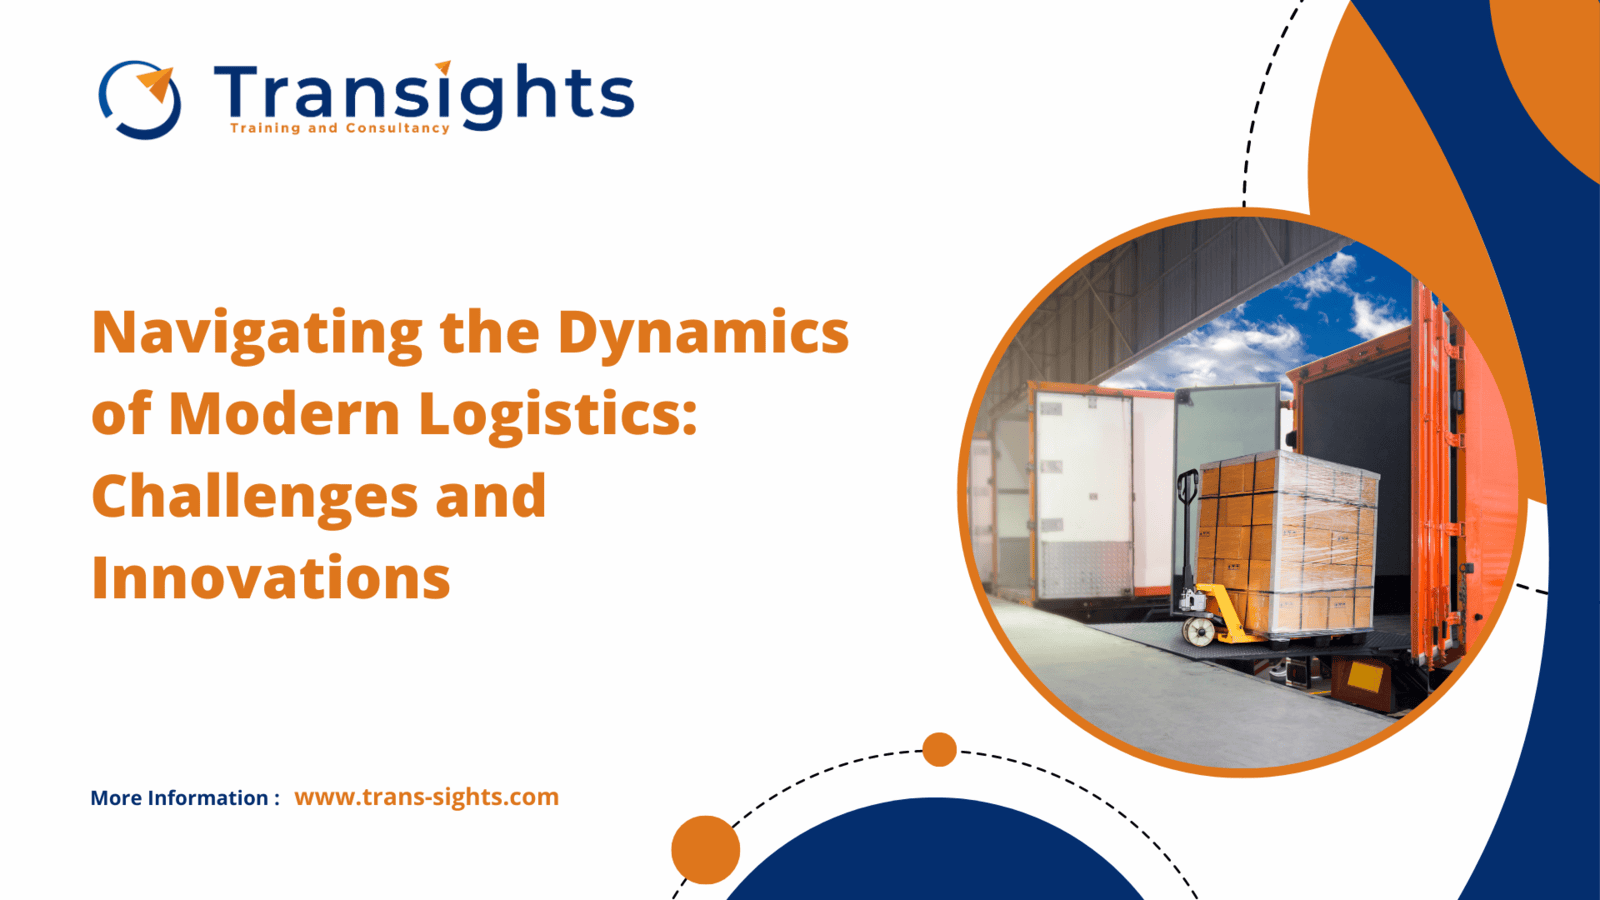 Navigating the Dynamics of Modern Logistics: Challenges and Innovations